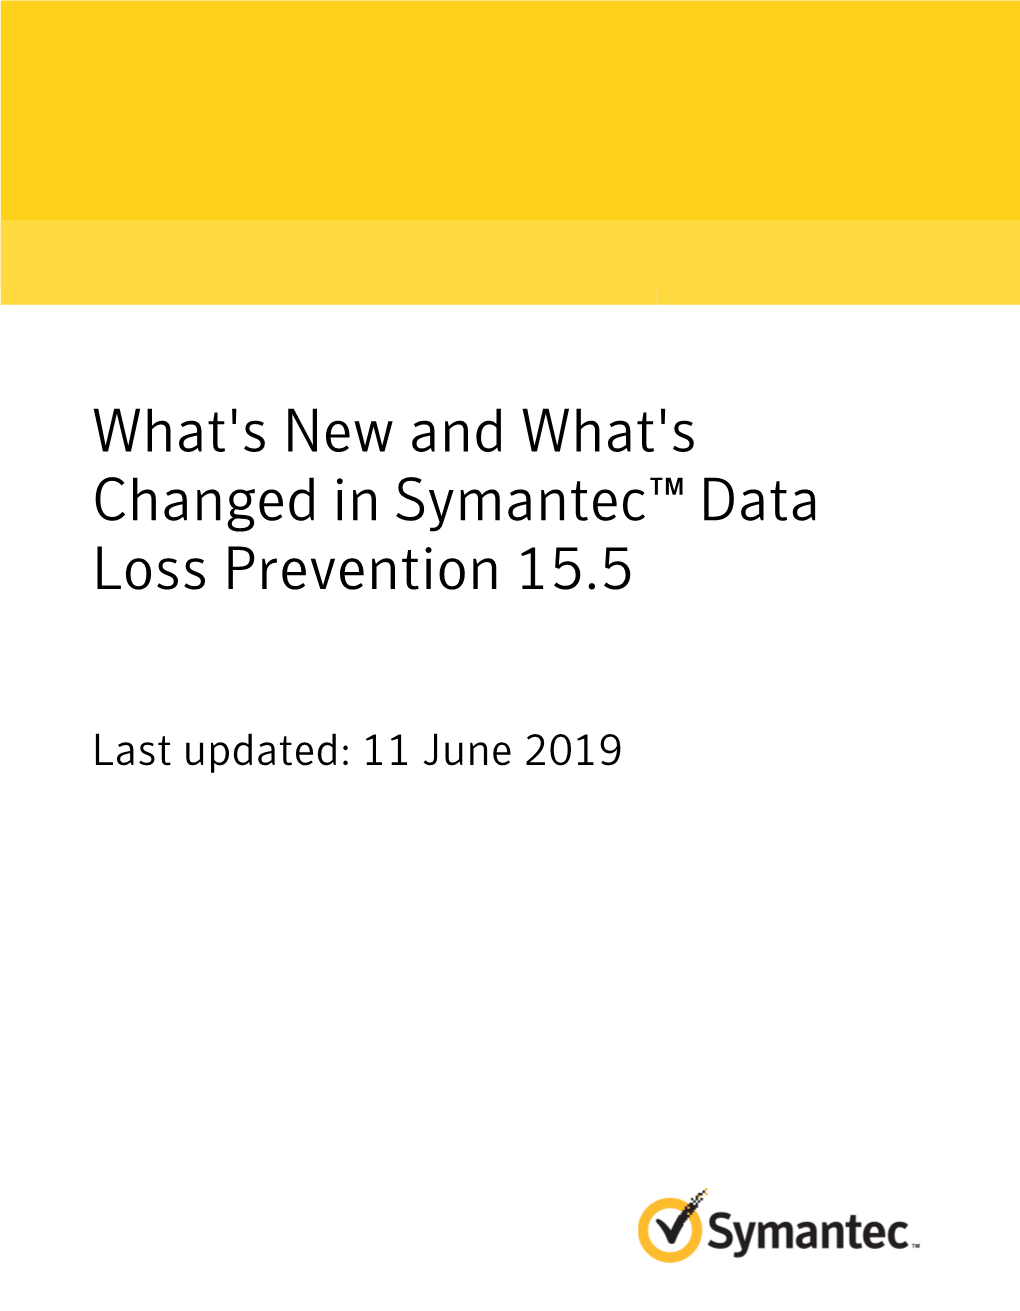 What's New and What's Changed in Symantec™ Data Loss Prevention 15.5